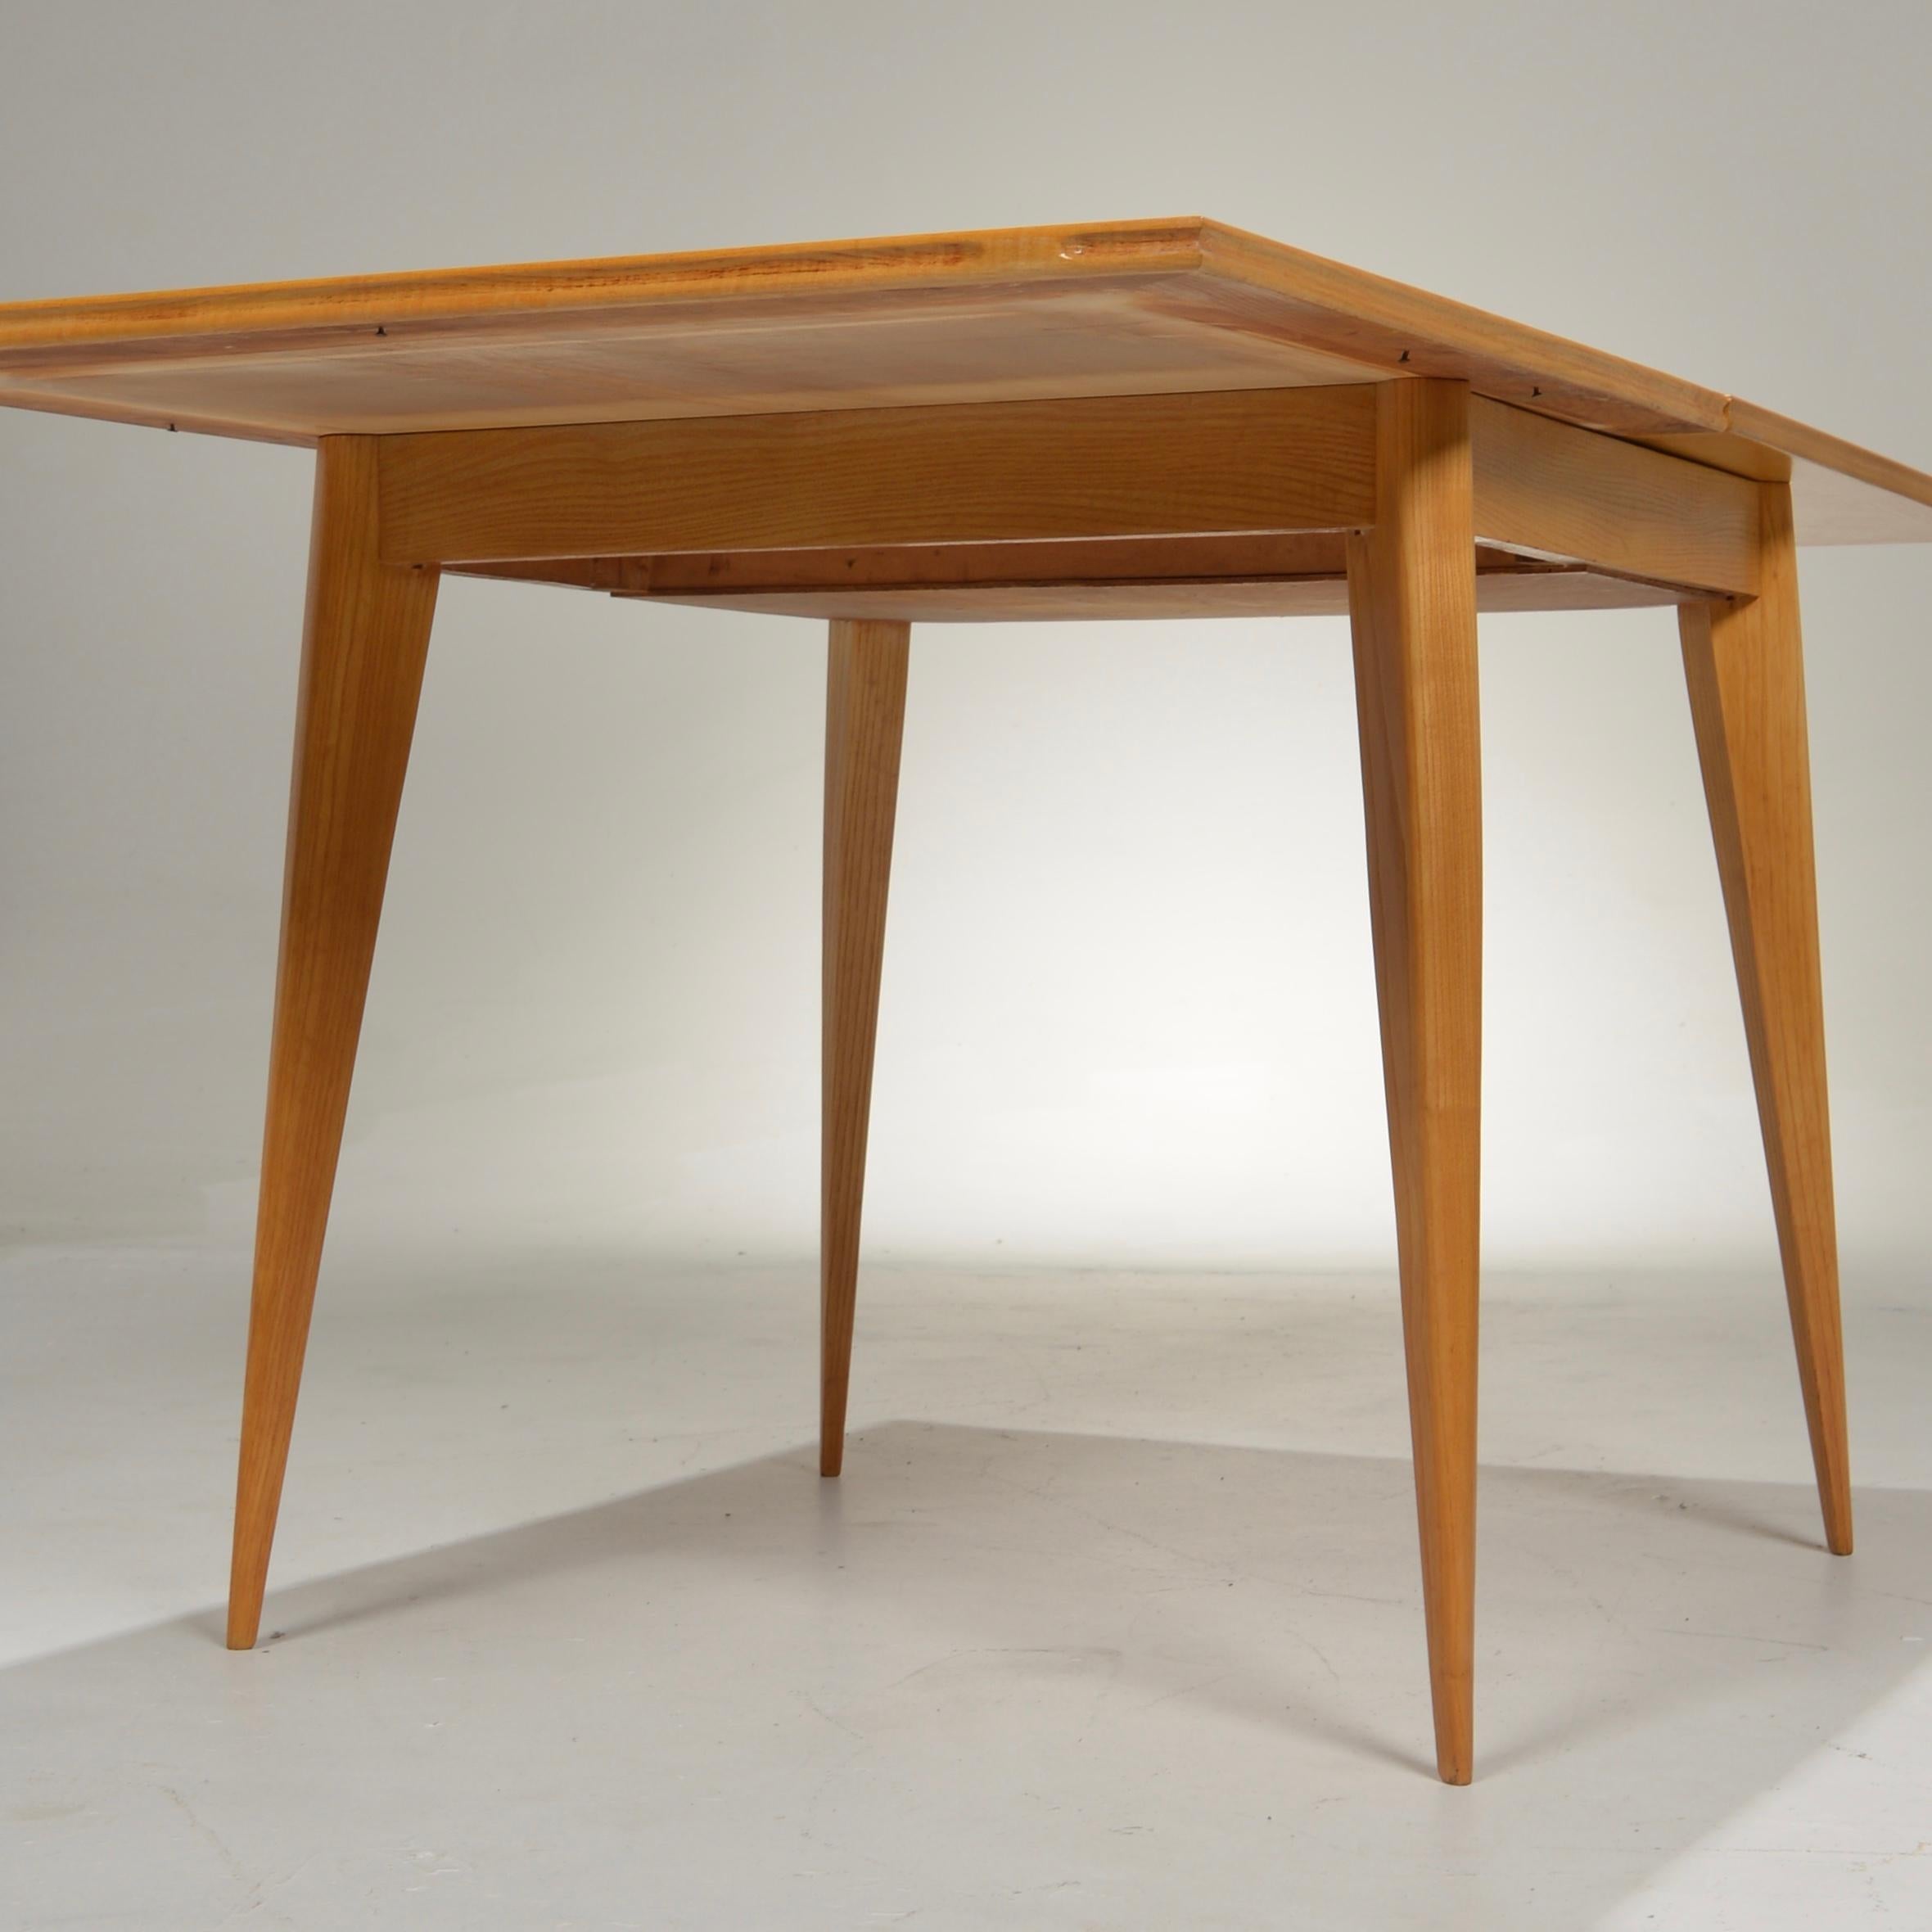 Mid-20th Century Restored French Mid-Century Modern Flip-Top Oak Dining Table